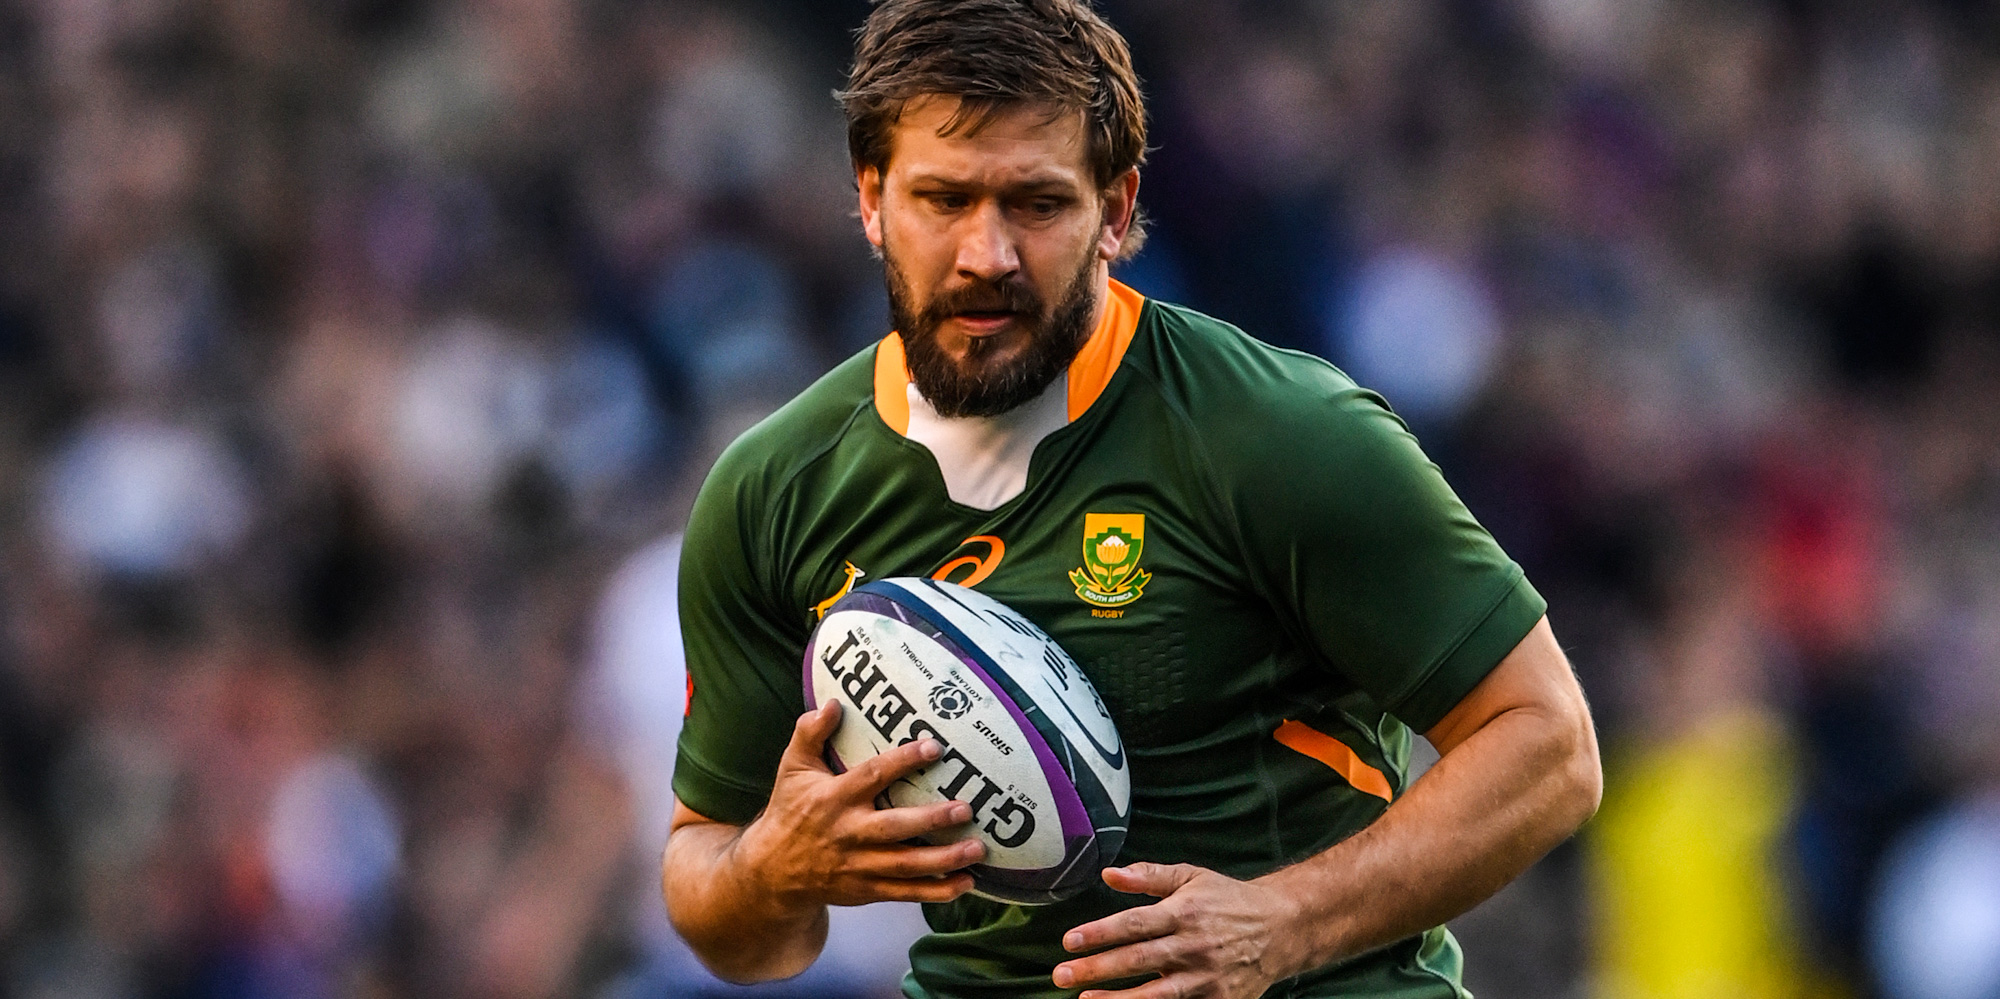 Frans Steyn will start at flyhalf in place of the injured Damian Willemse.